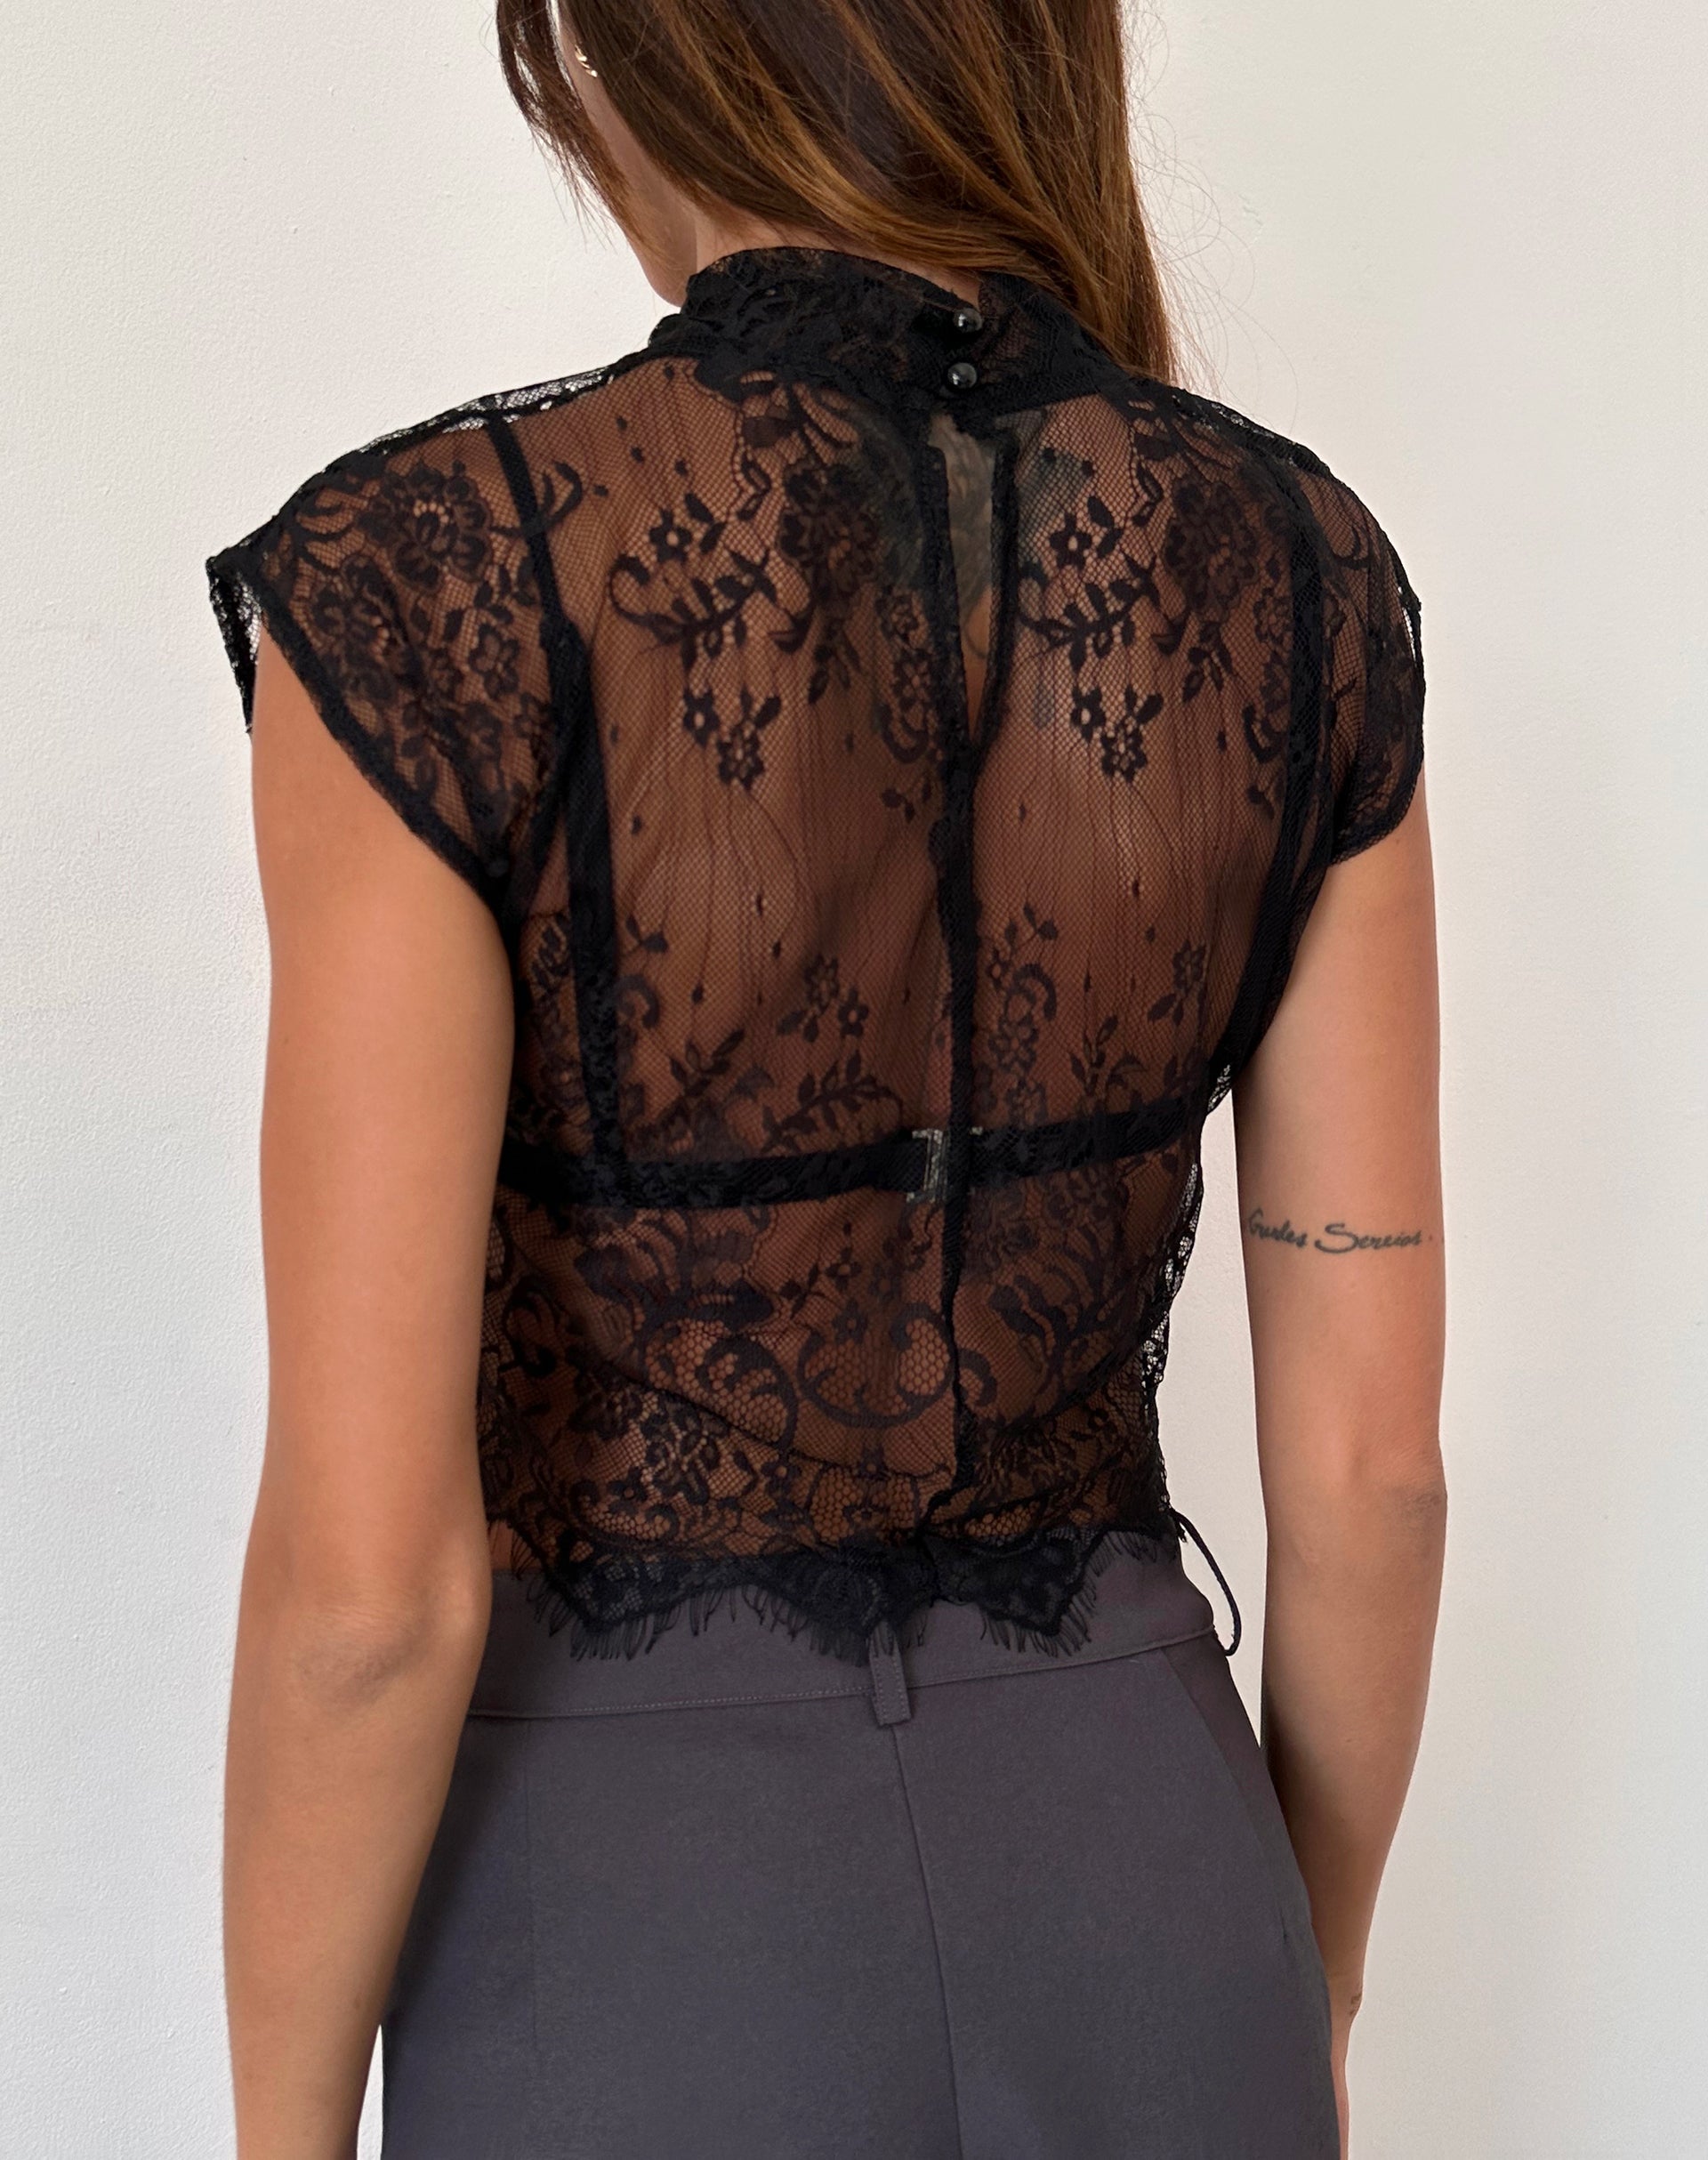 Image of Nioly Unlined Top in Black Eyelash Lace